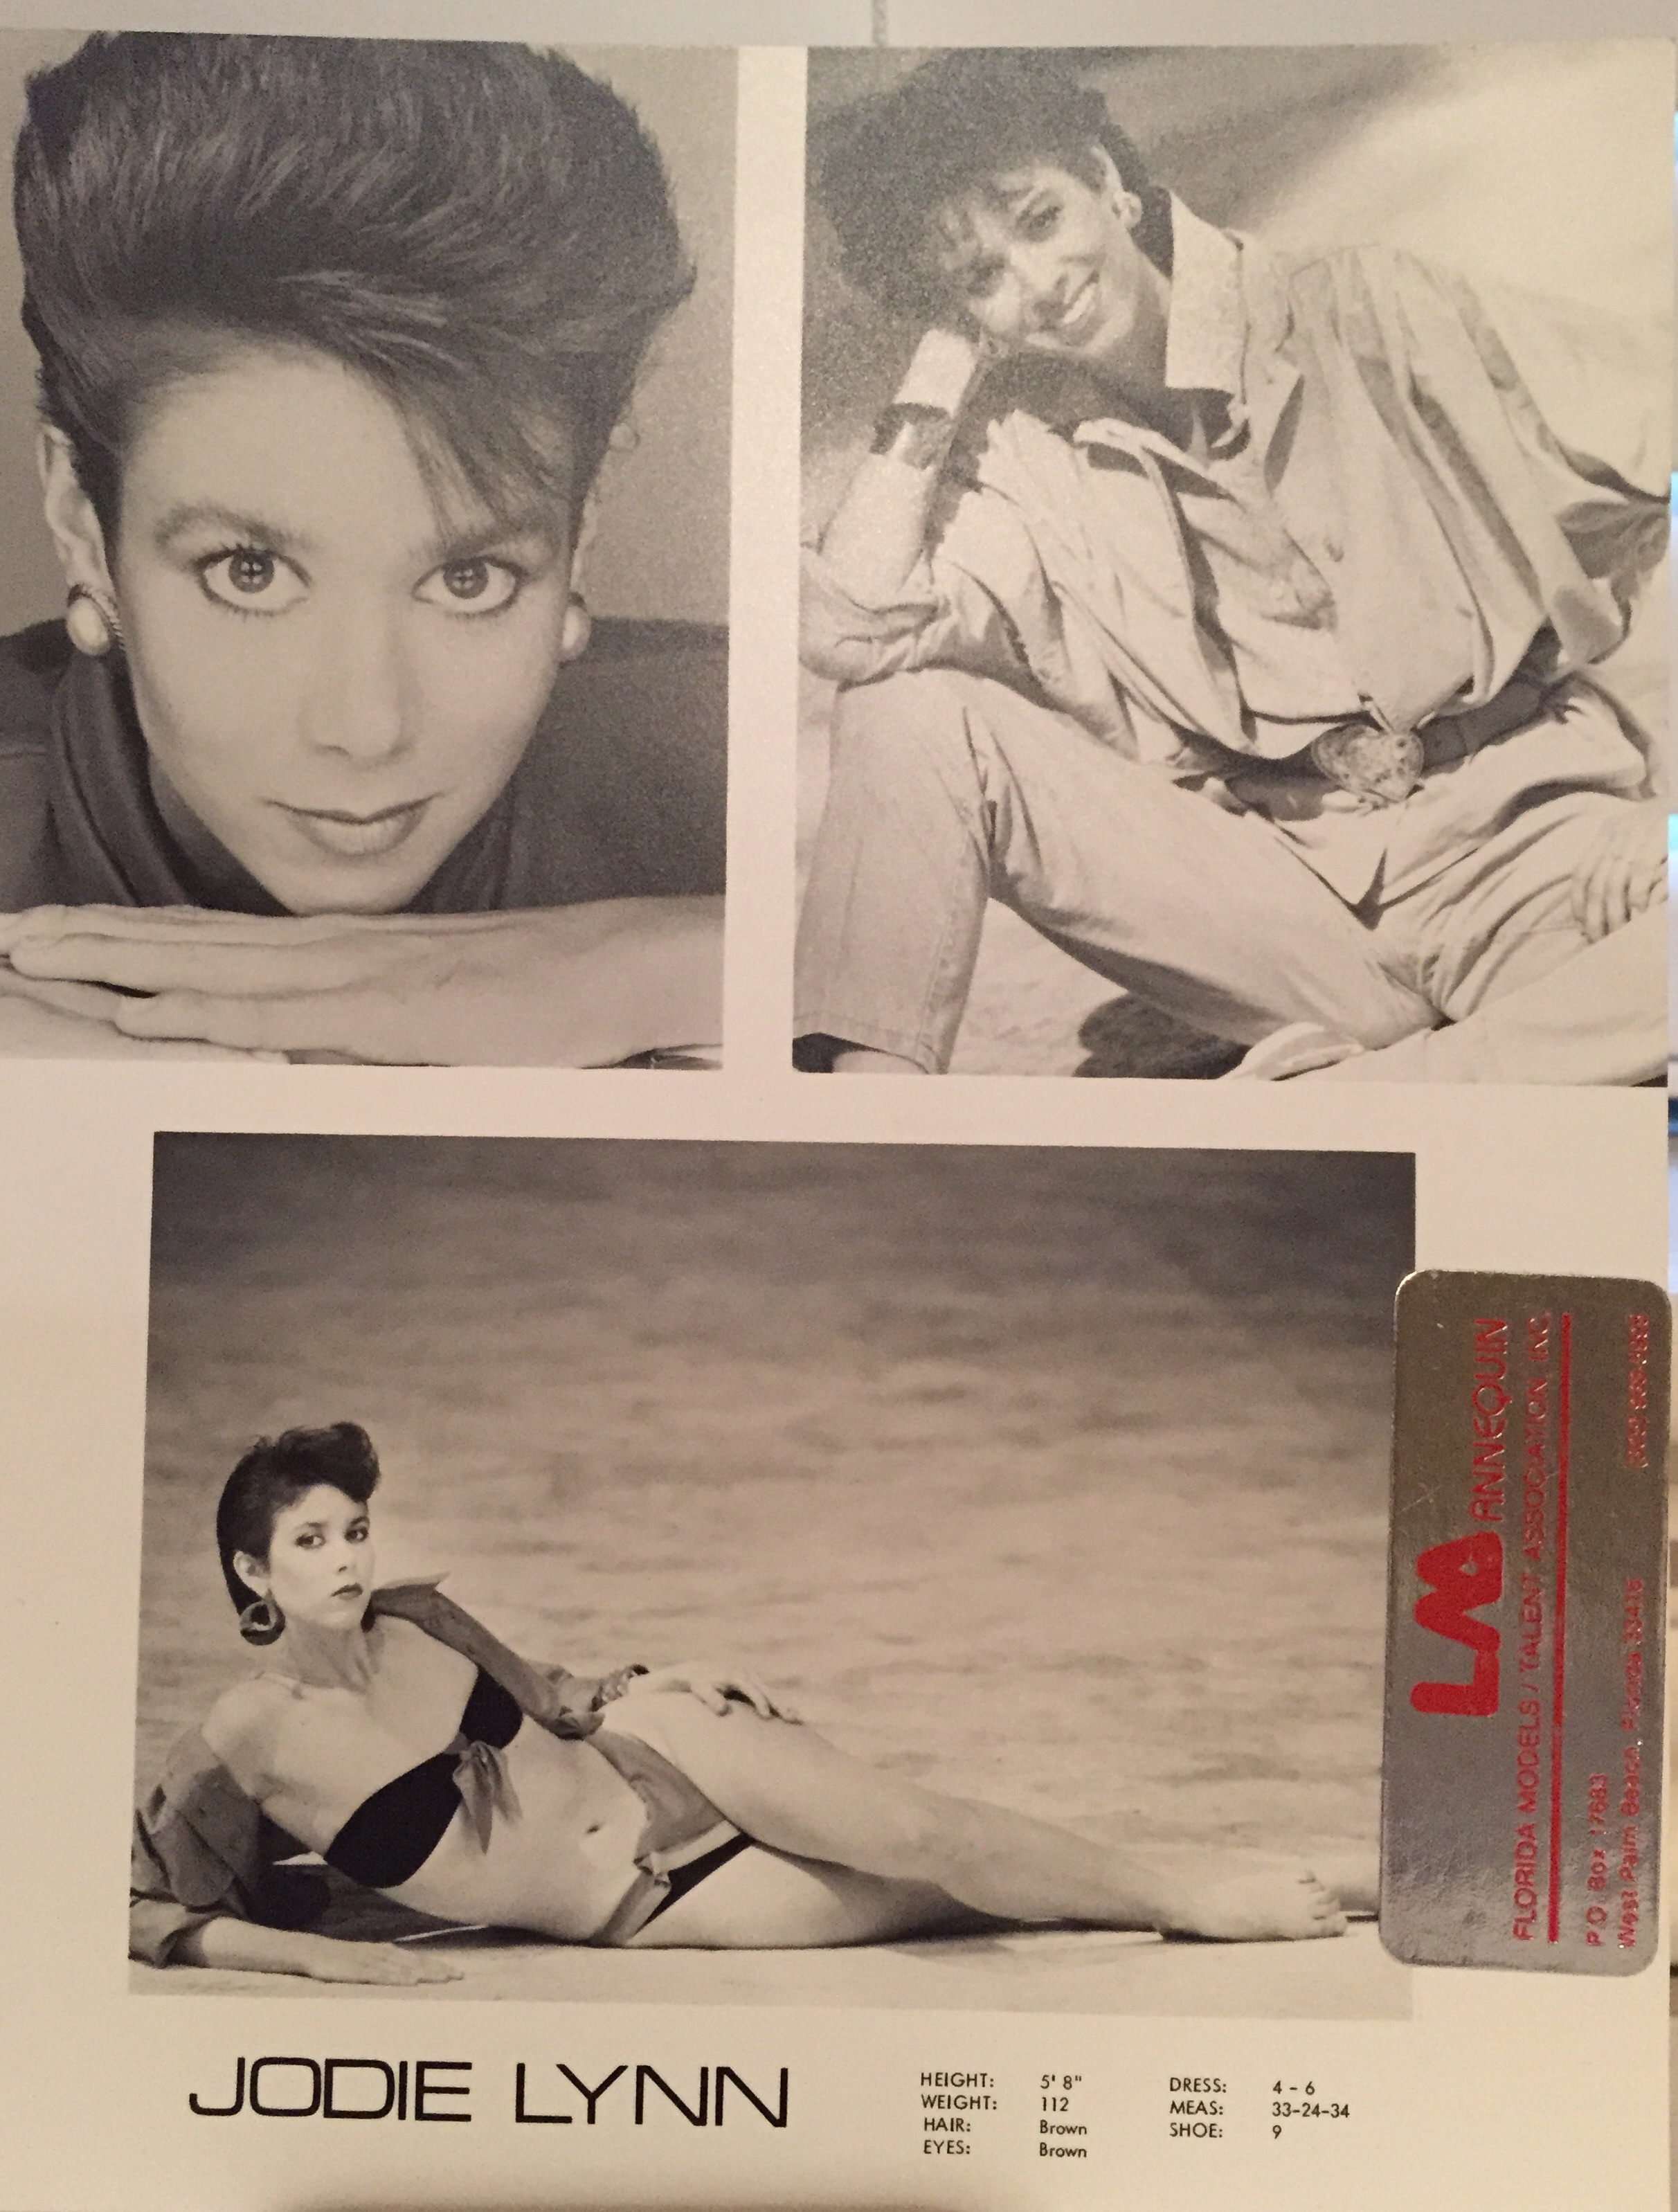 An early modeling comp. card featuring Jodie. Representing Le Mannequin Models, Palm Beach, Florida.